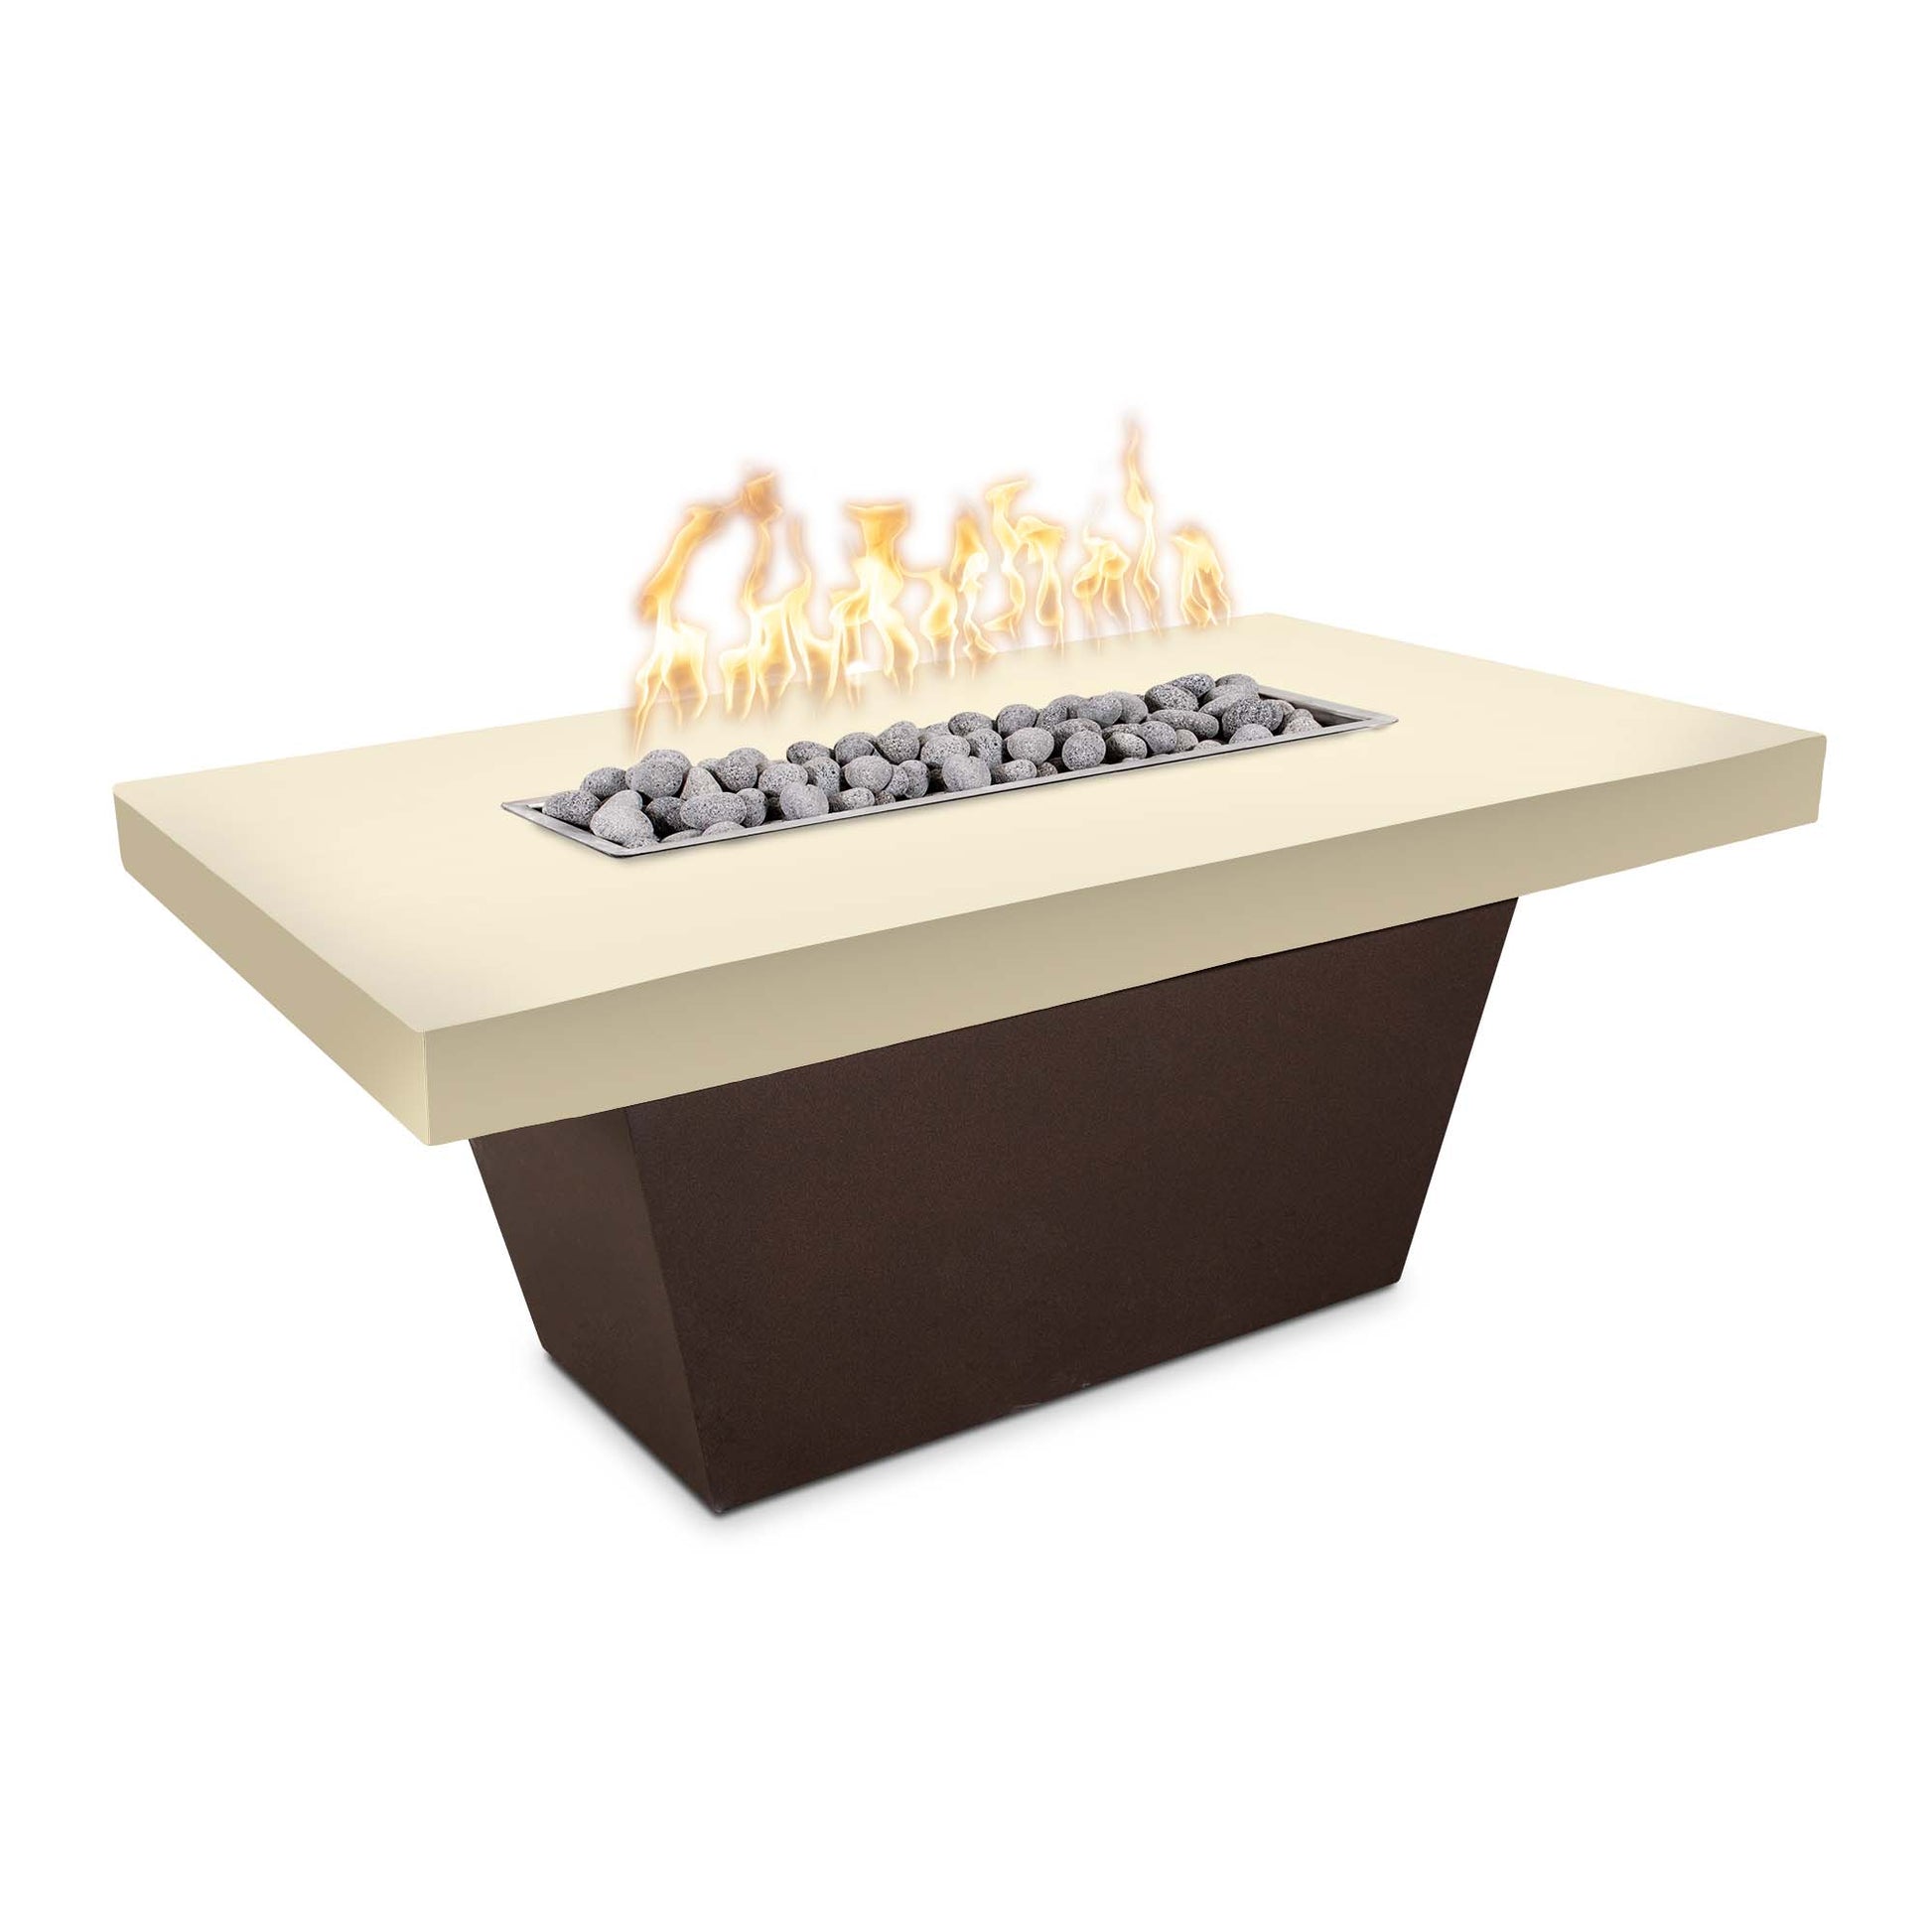 The Outdoor Plus Tacoma 48" Natural Gray Concrete Top & Silver Vein Powder Coated Base Natural Gas Fire Table with Match Lit Ignition